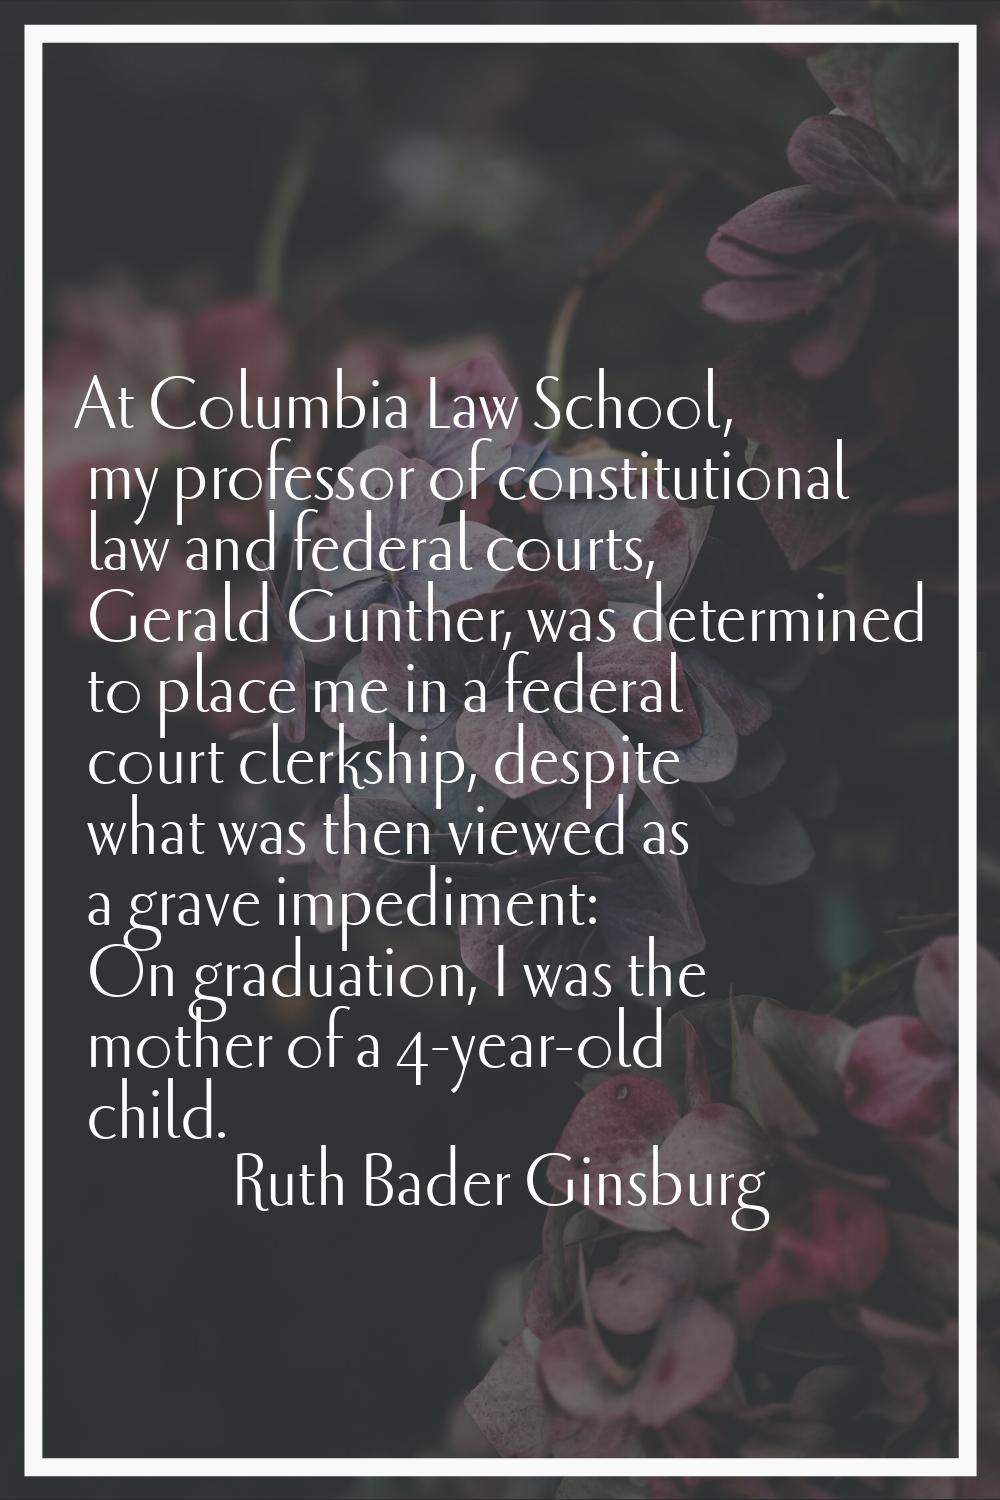 At Columbia Law School, my professor of constitutional law and federal courts, Gerald Gunther, was 